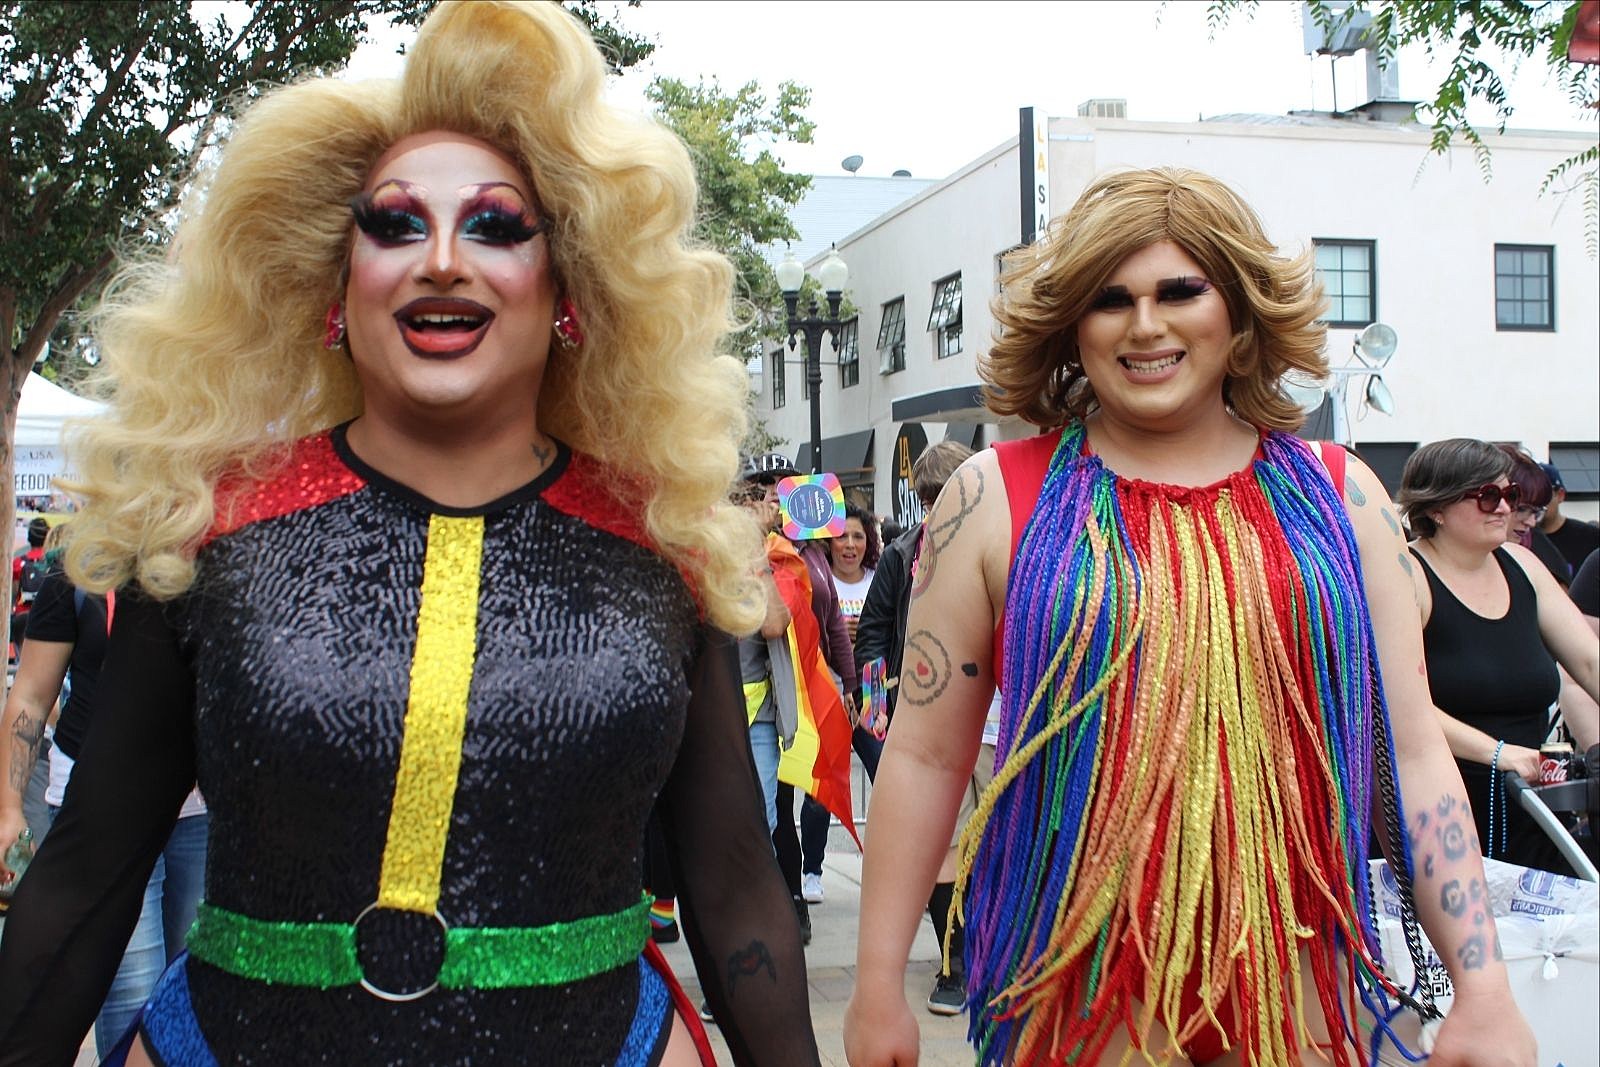 Petition In Idaho Aims To Ban Drag Events In Public Places